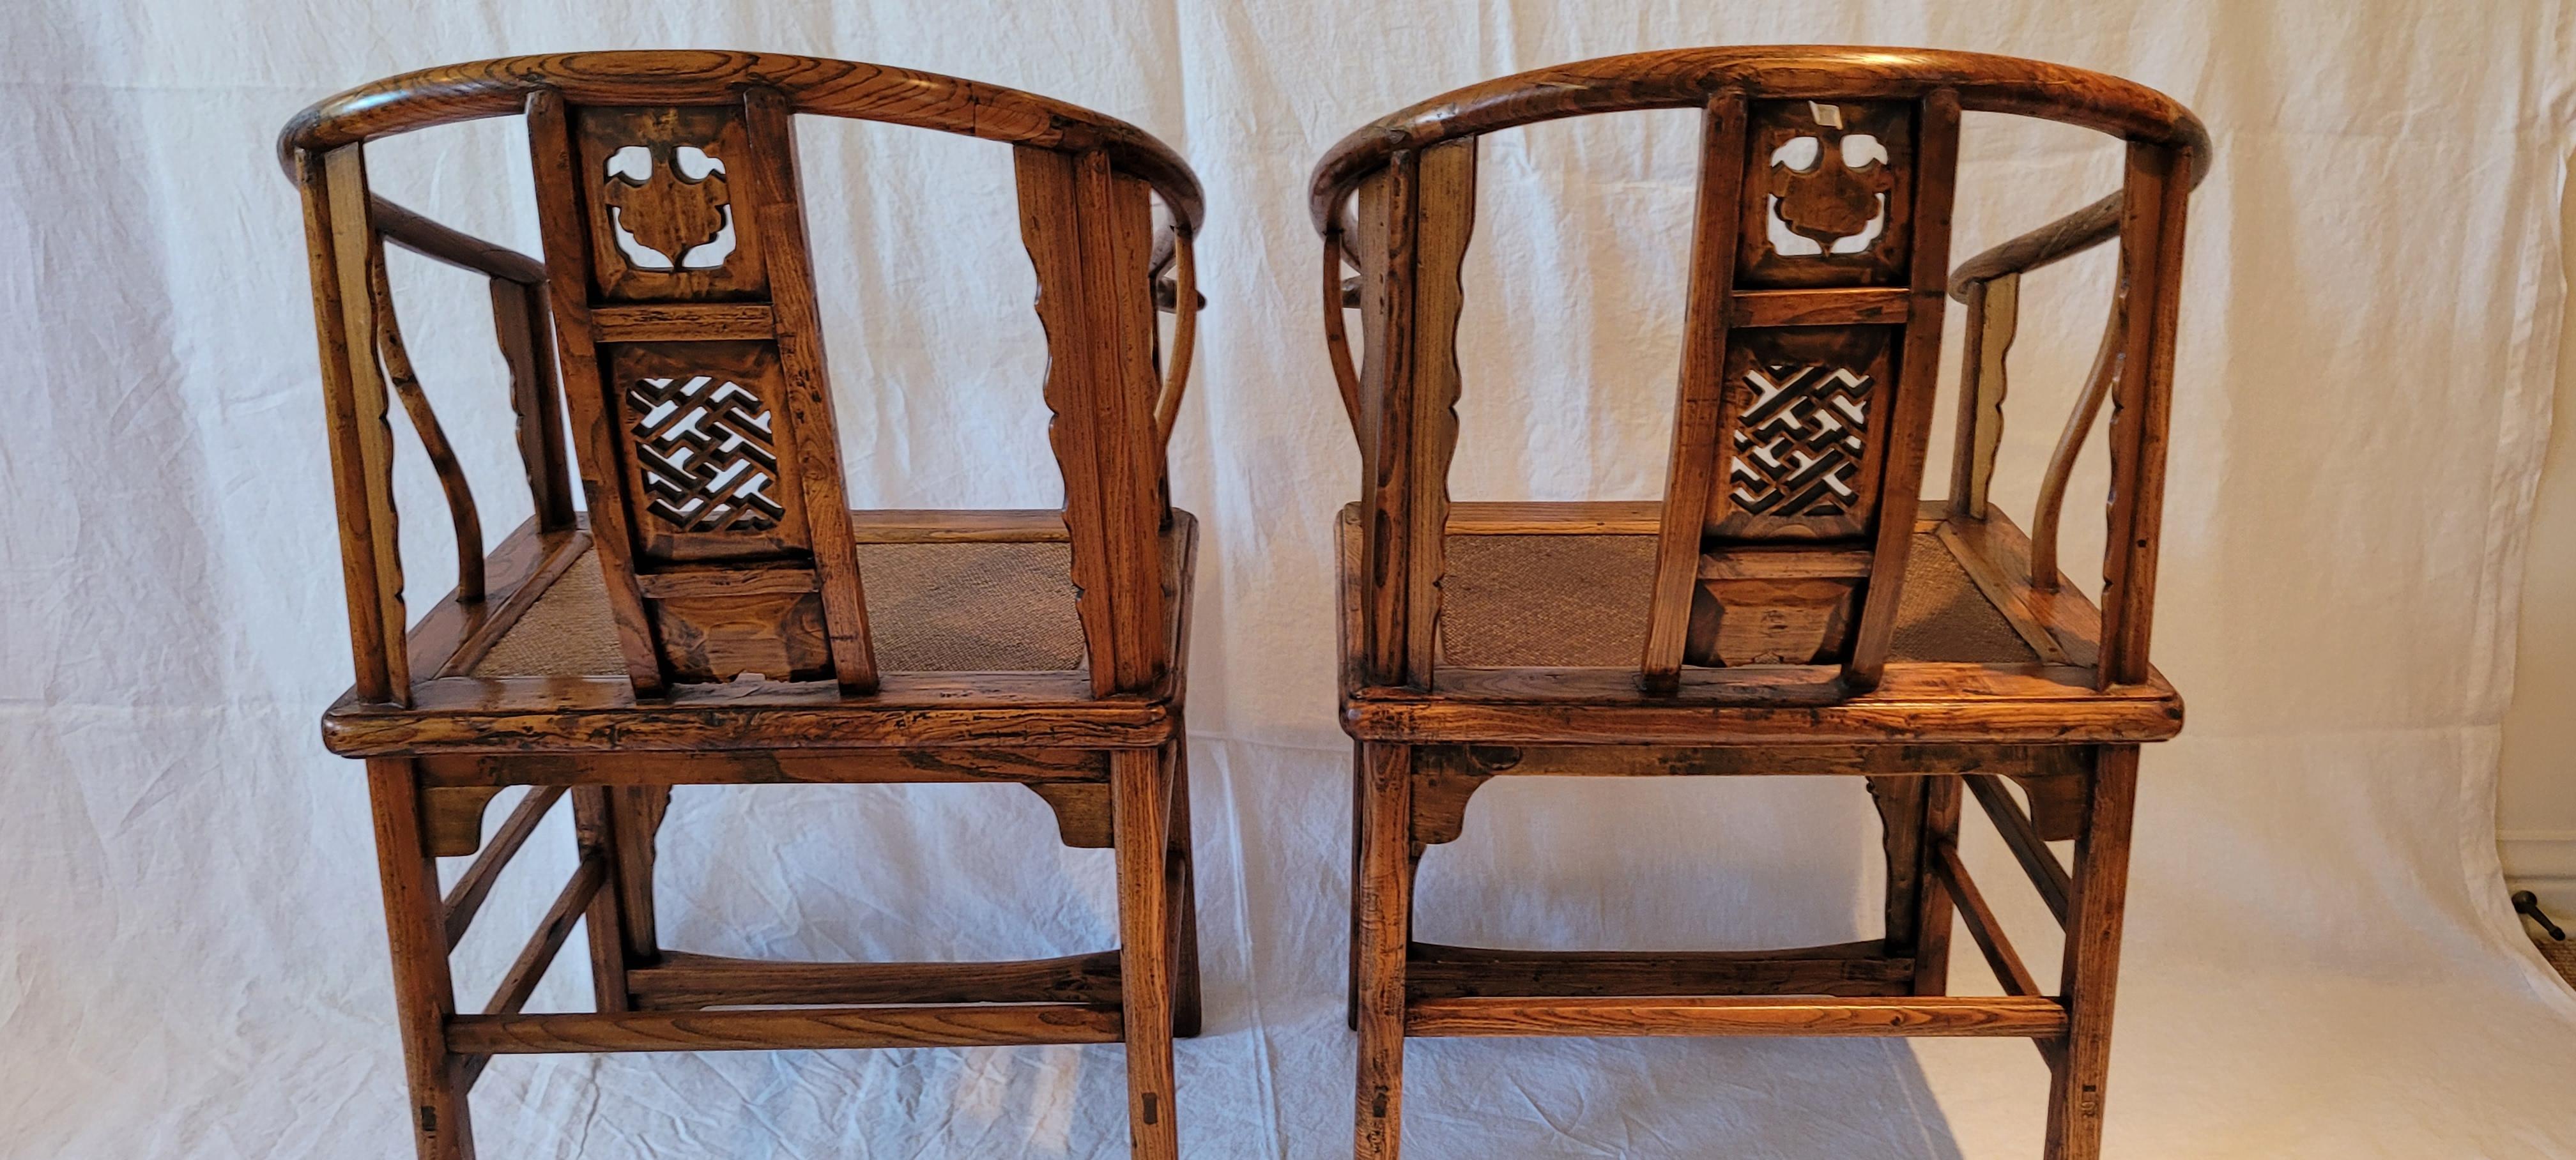 Pair of Horseshoe Back Chairs - mid 19th Century For Sale 3